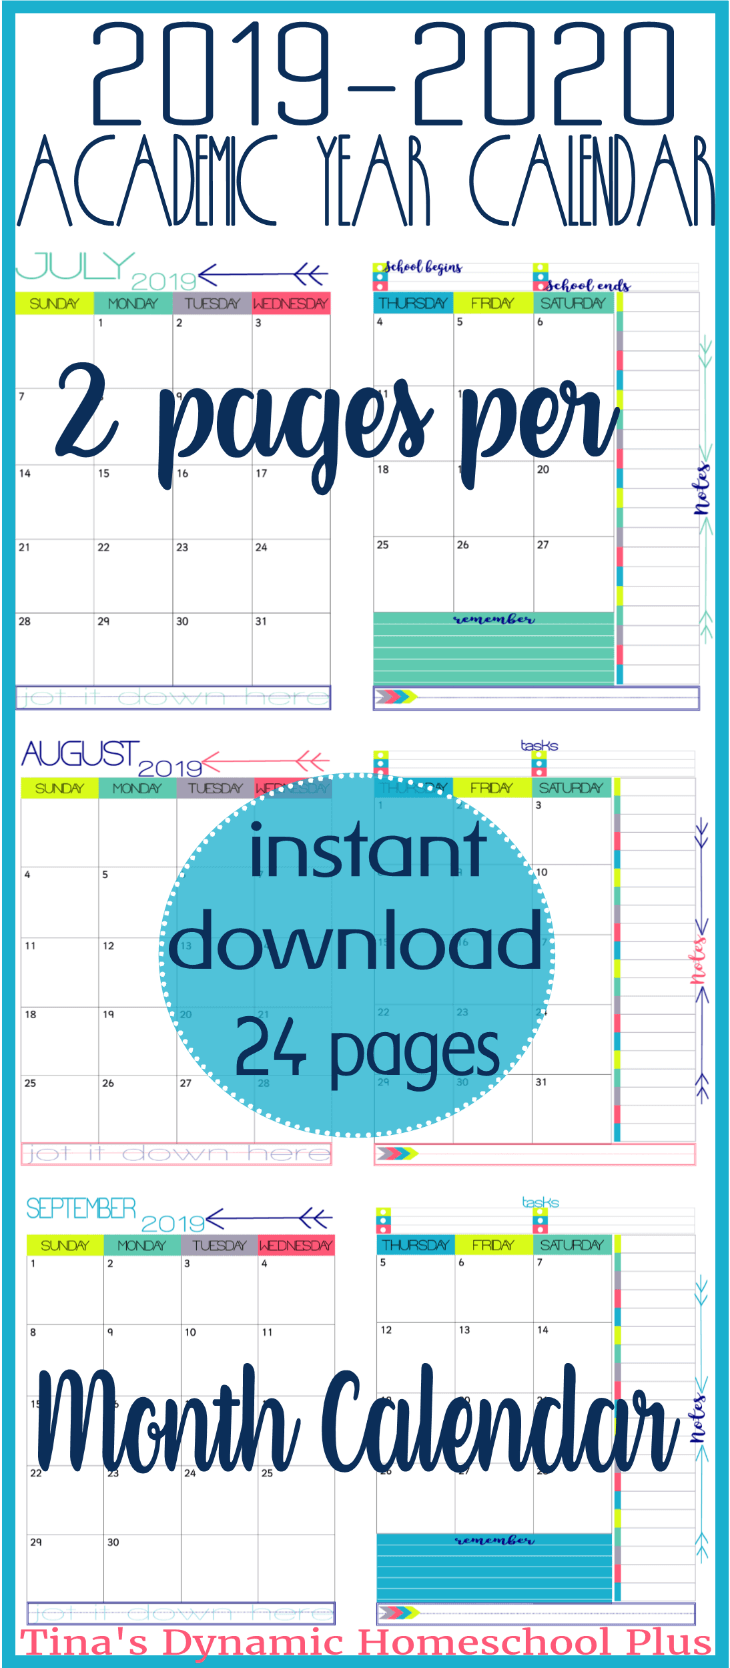 You'll love this AWESOME color choice for a homeschool planner, student planner, or home management binder. It is an academic calendar BUT it has 12 months. Grab it today and use in all of your planners! Click here to get it!